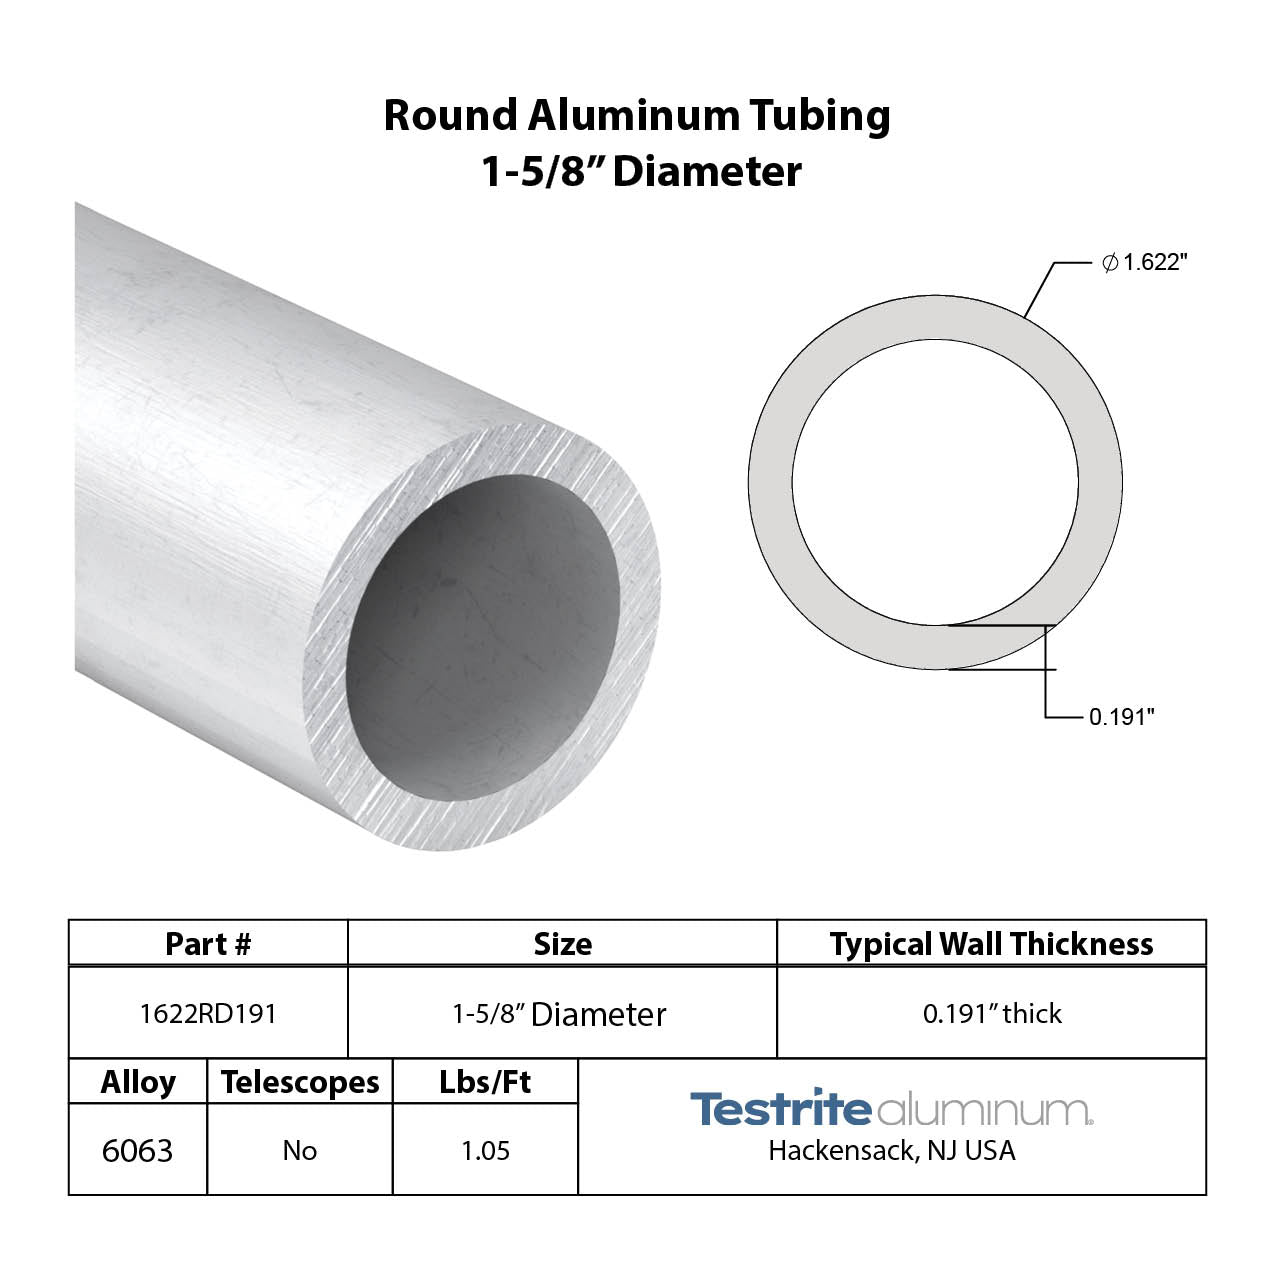 Spec sheet for approximately 1.625" x .187" Aluminum Round Tube, Round aluminum tube 1-5/8" x 3/16" Wall Aluminum Tube including lbs per ft